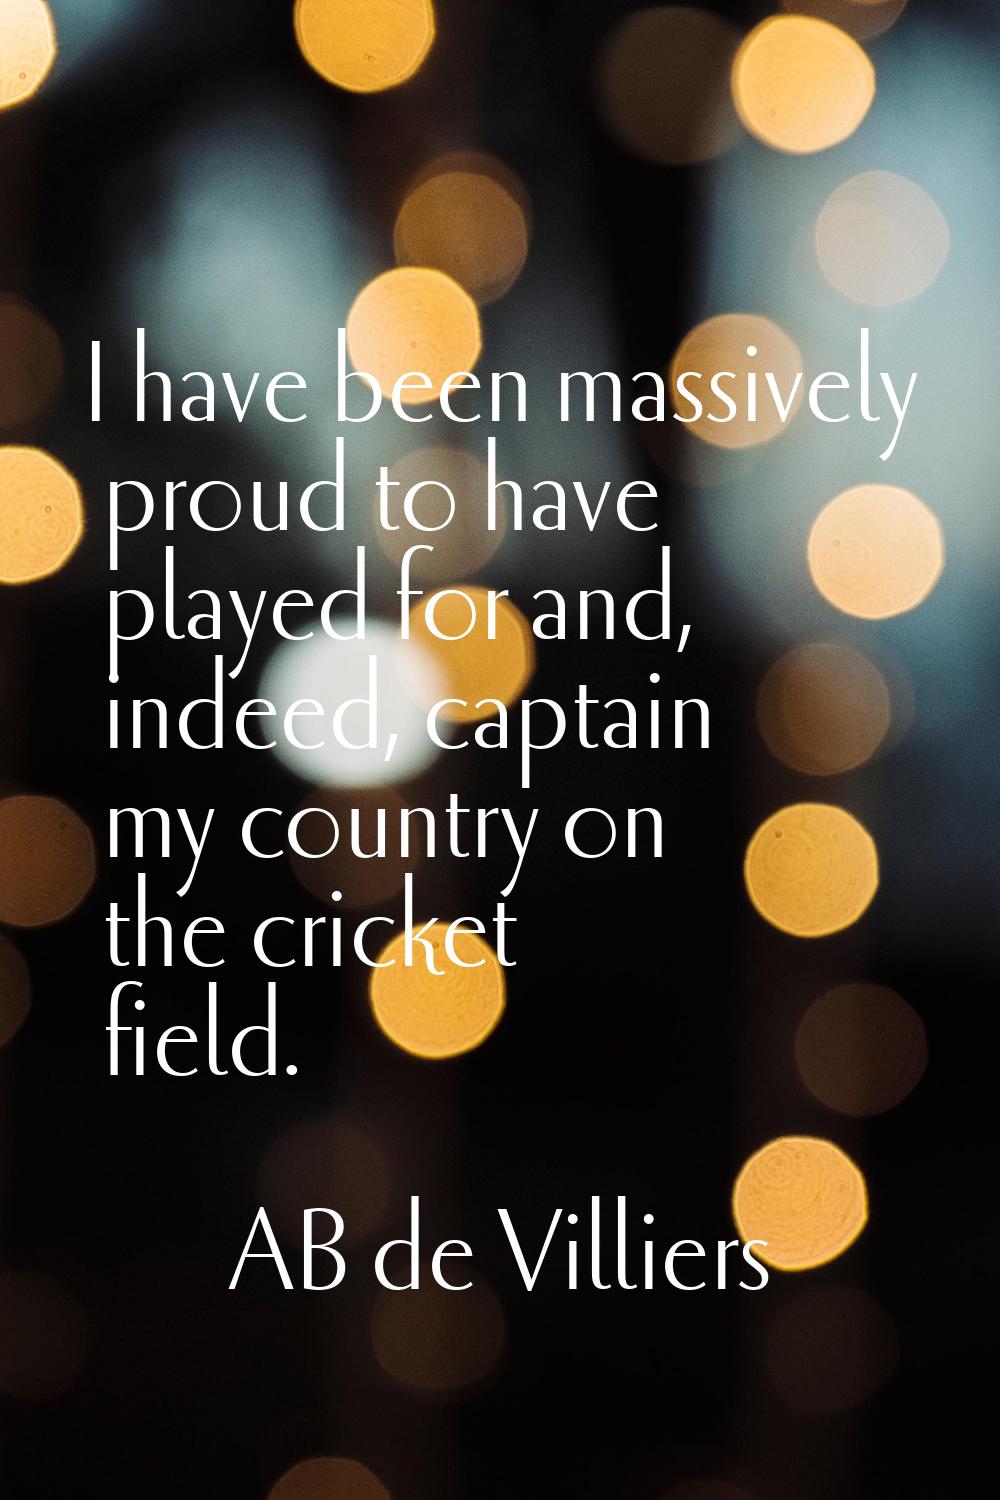 I have been massively proud to have played for and, indeed, captain my country on the cricket field